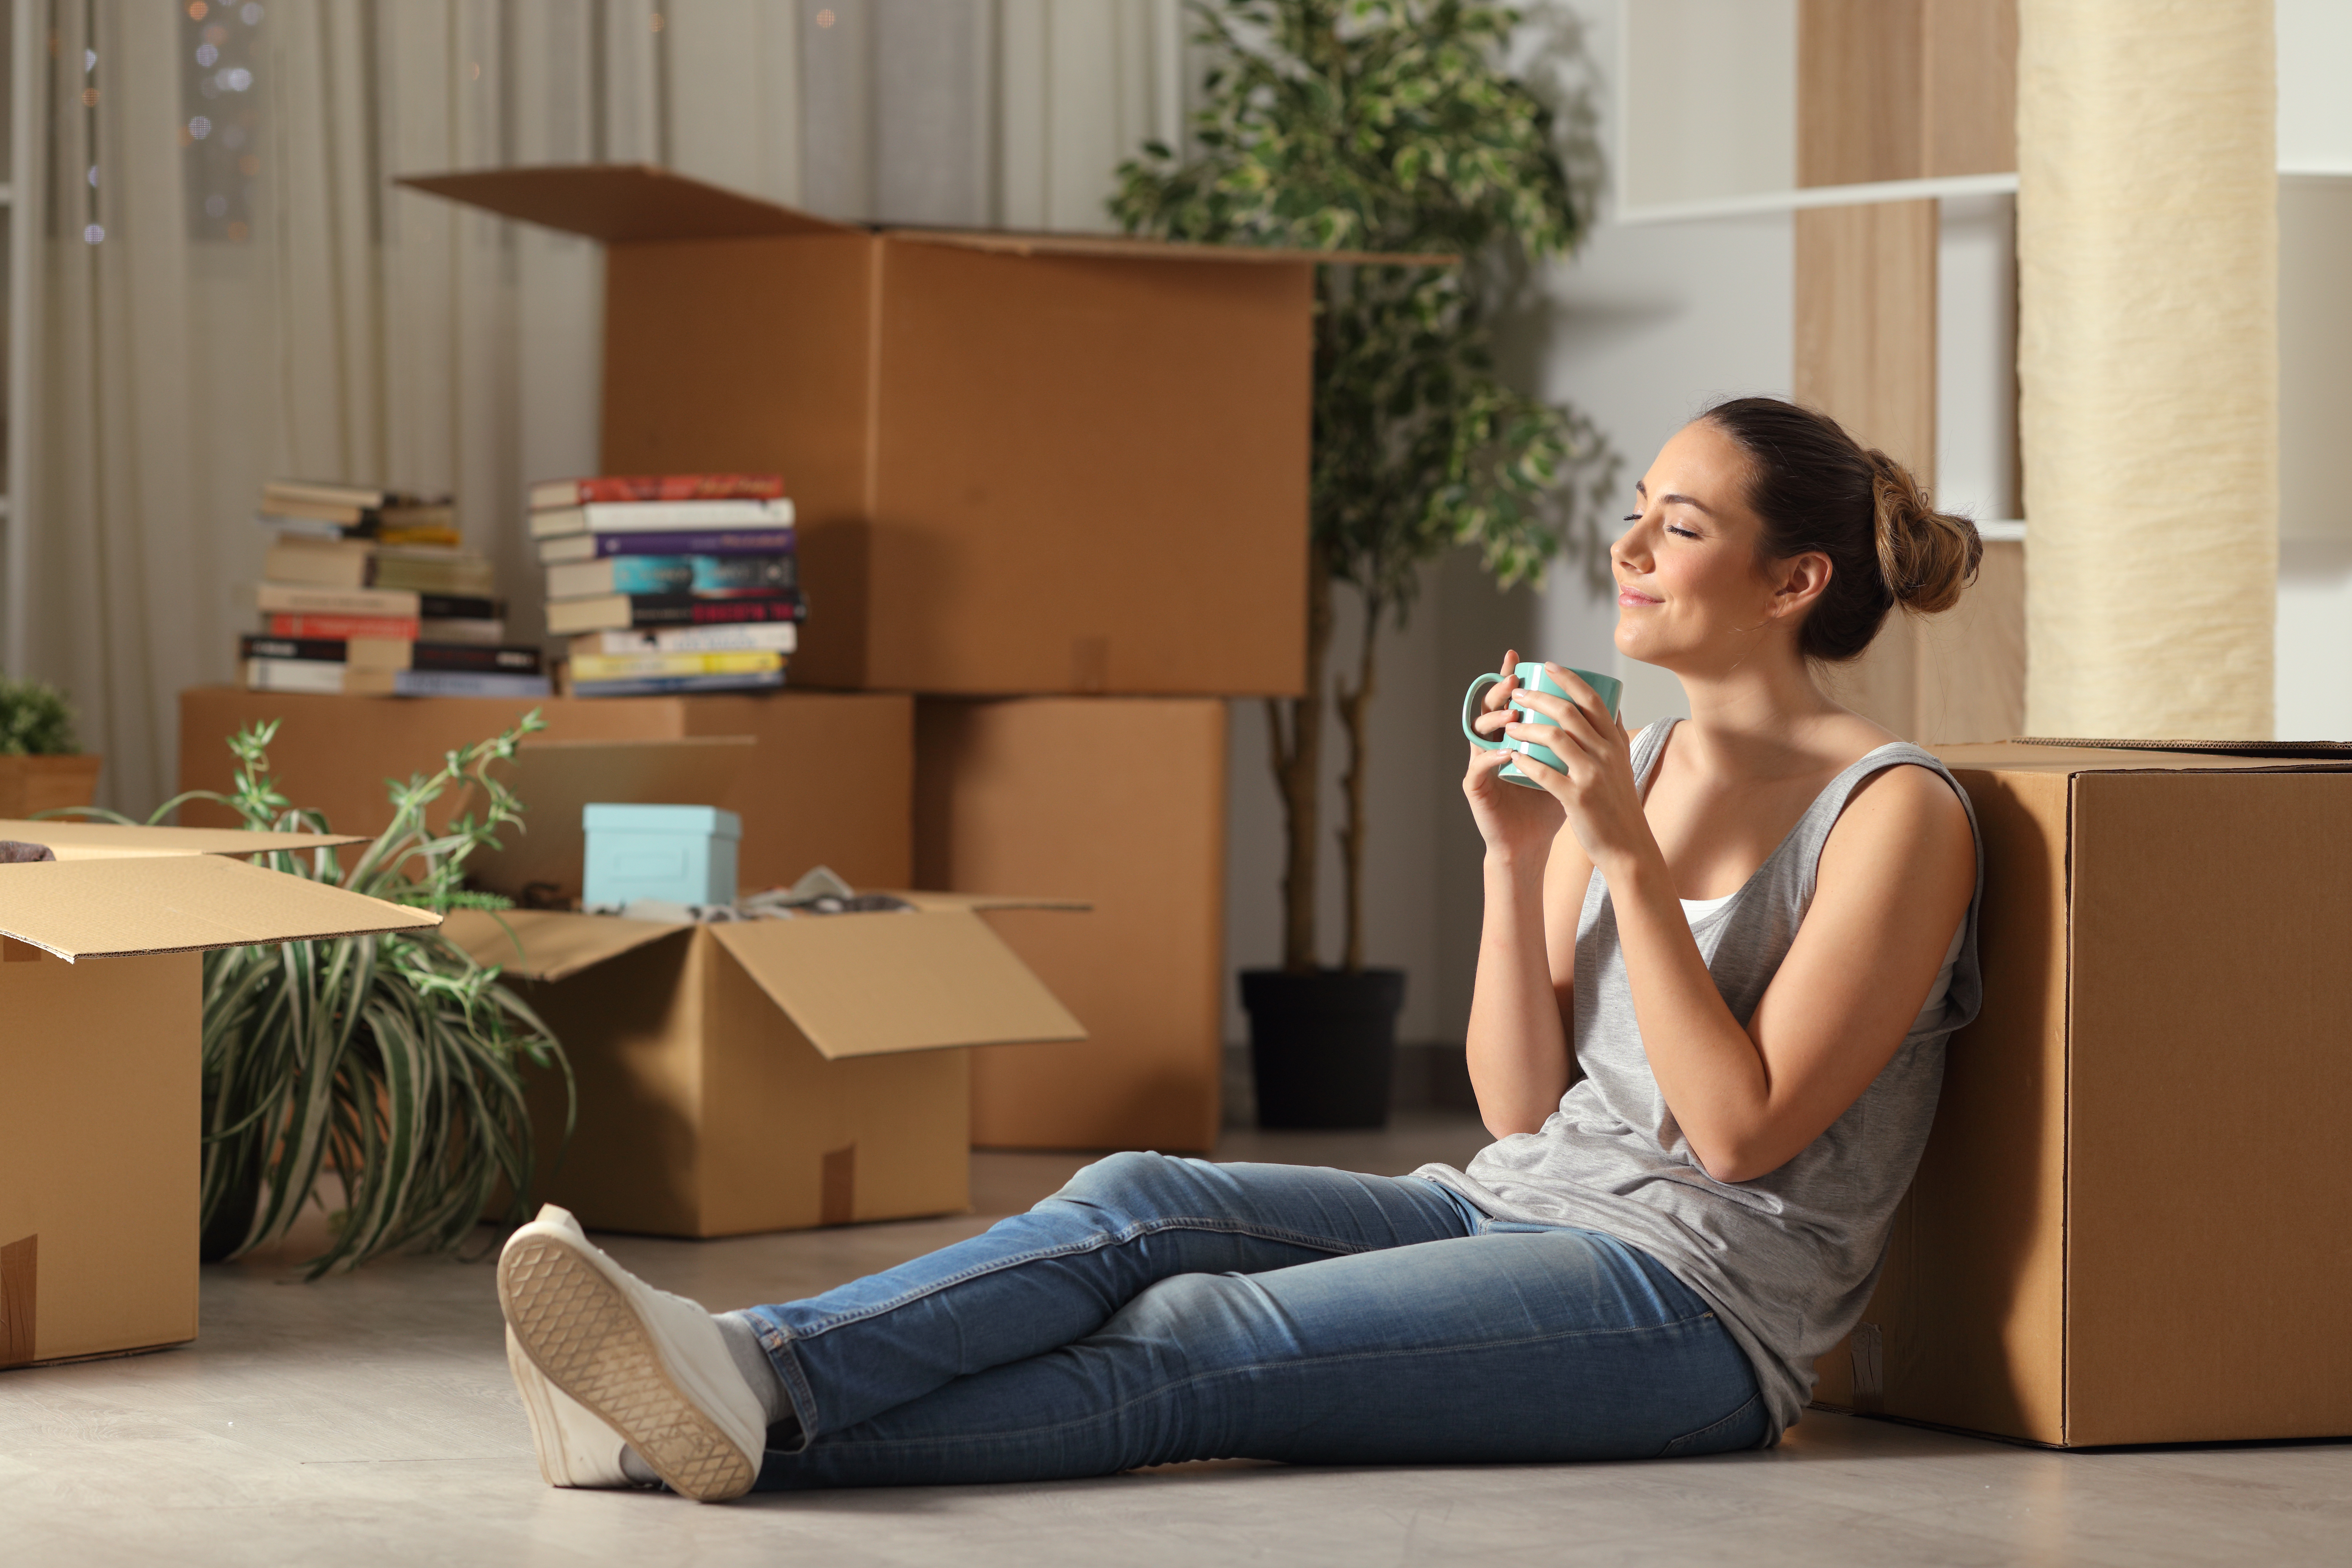 Woman sitting down leaning against cardboard boxes and smiling